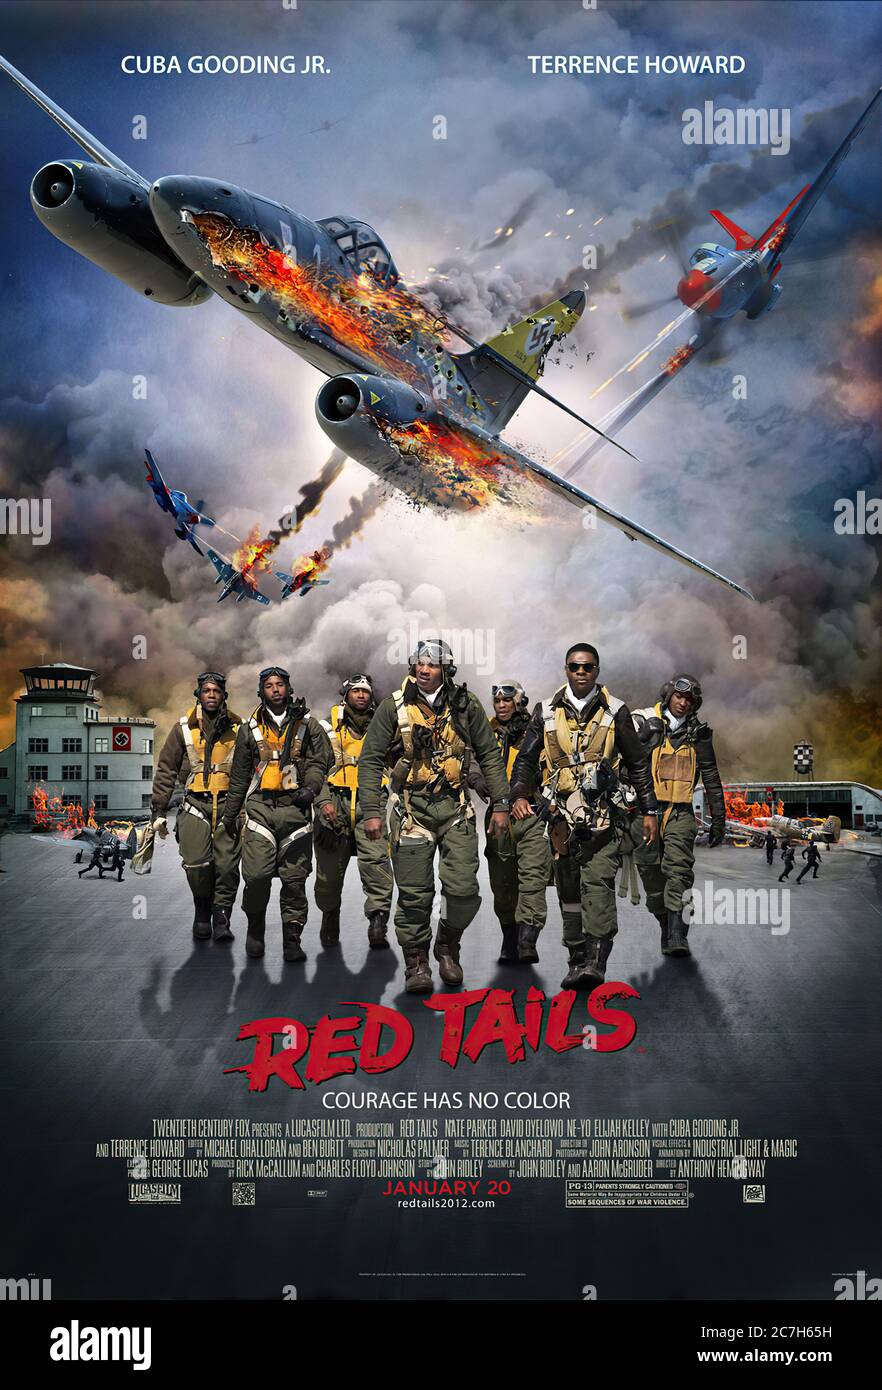 Red Tails - Movie Poster Stock Photo